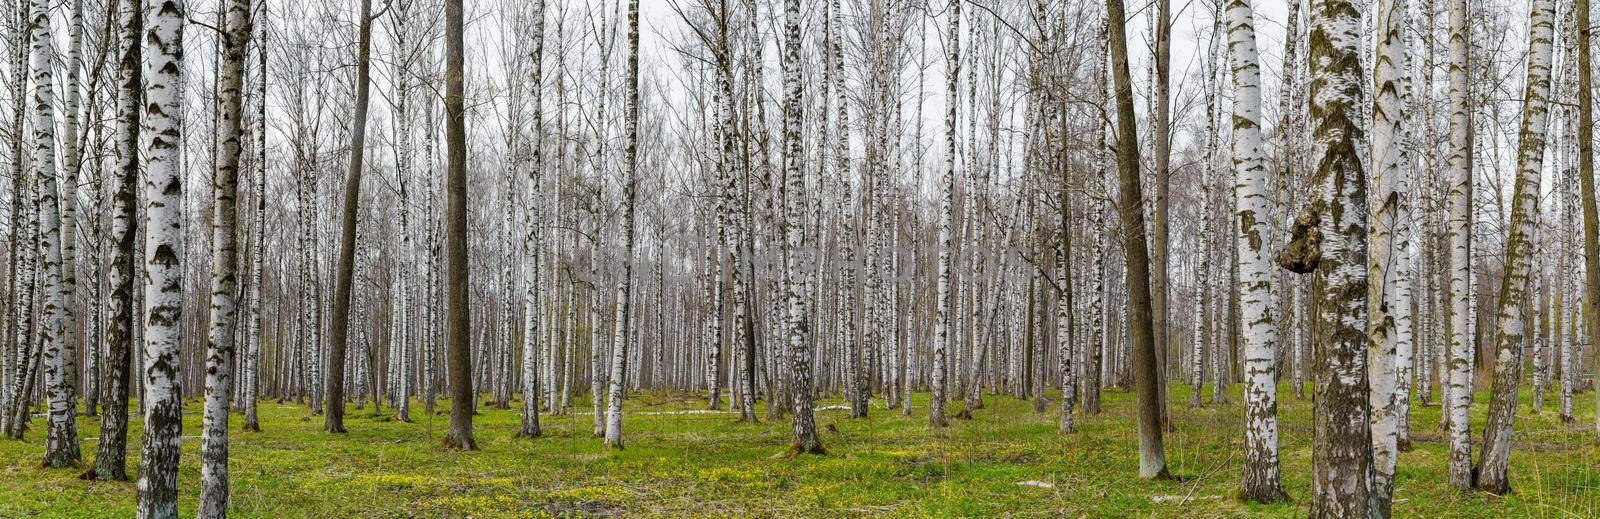 Panorama of a birch grove on green grass in a natural park in cloudy weather, the first days of spring, green leaves begin to appear. High quality photo